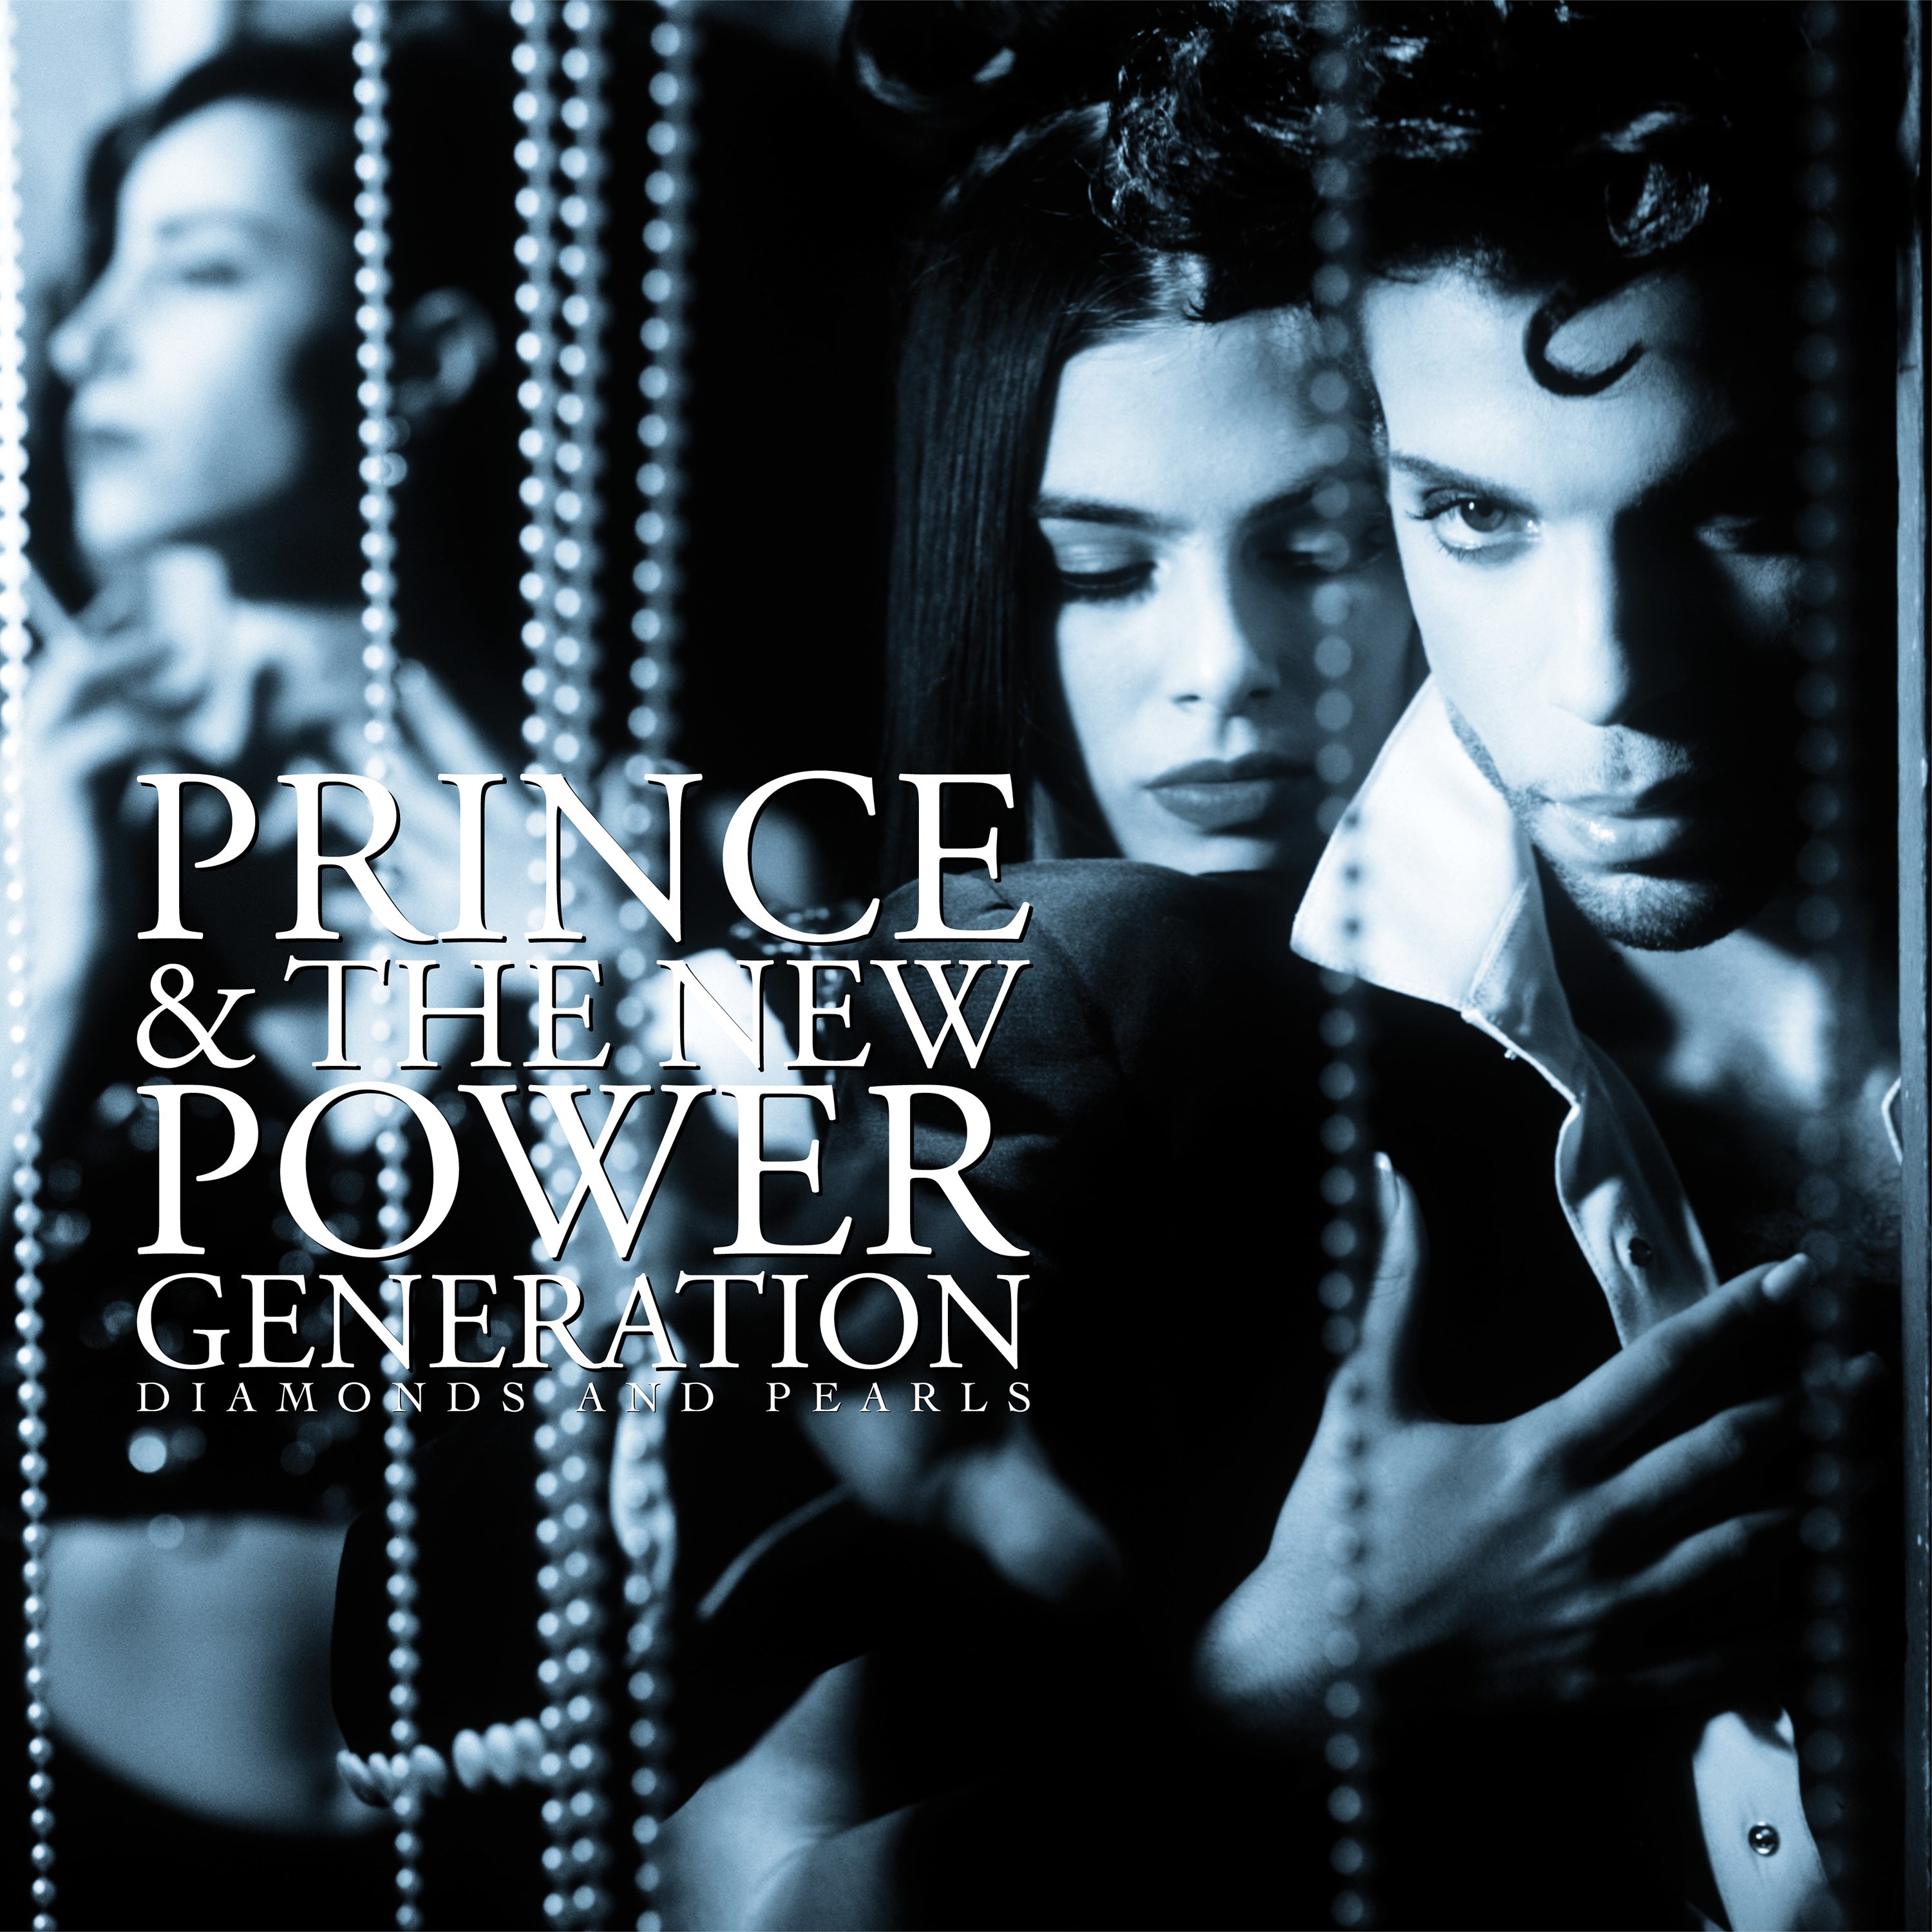 Prince & The New Power Generation | Diamonds and Pearls Super Deluxe Edition | CD - 0